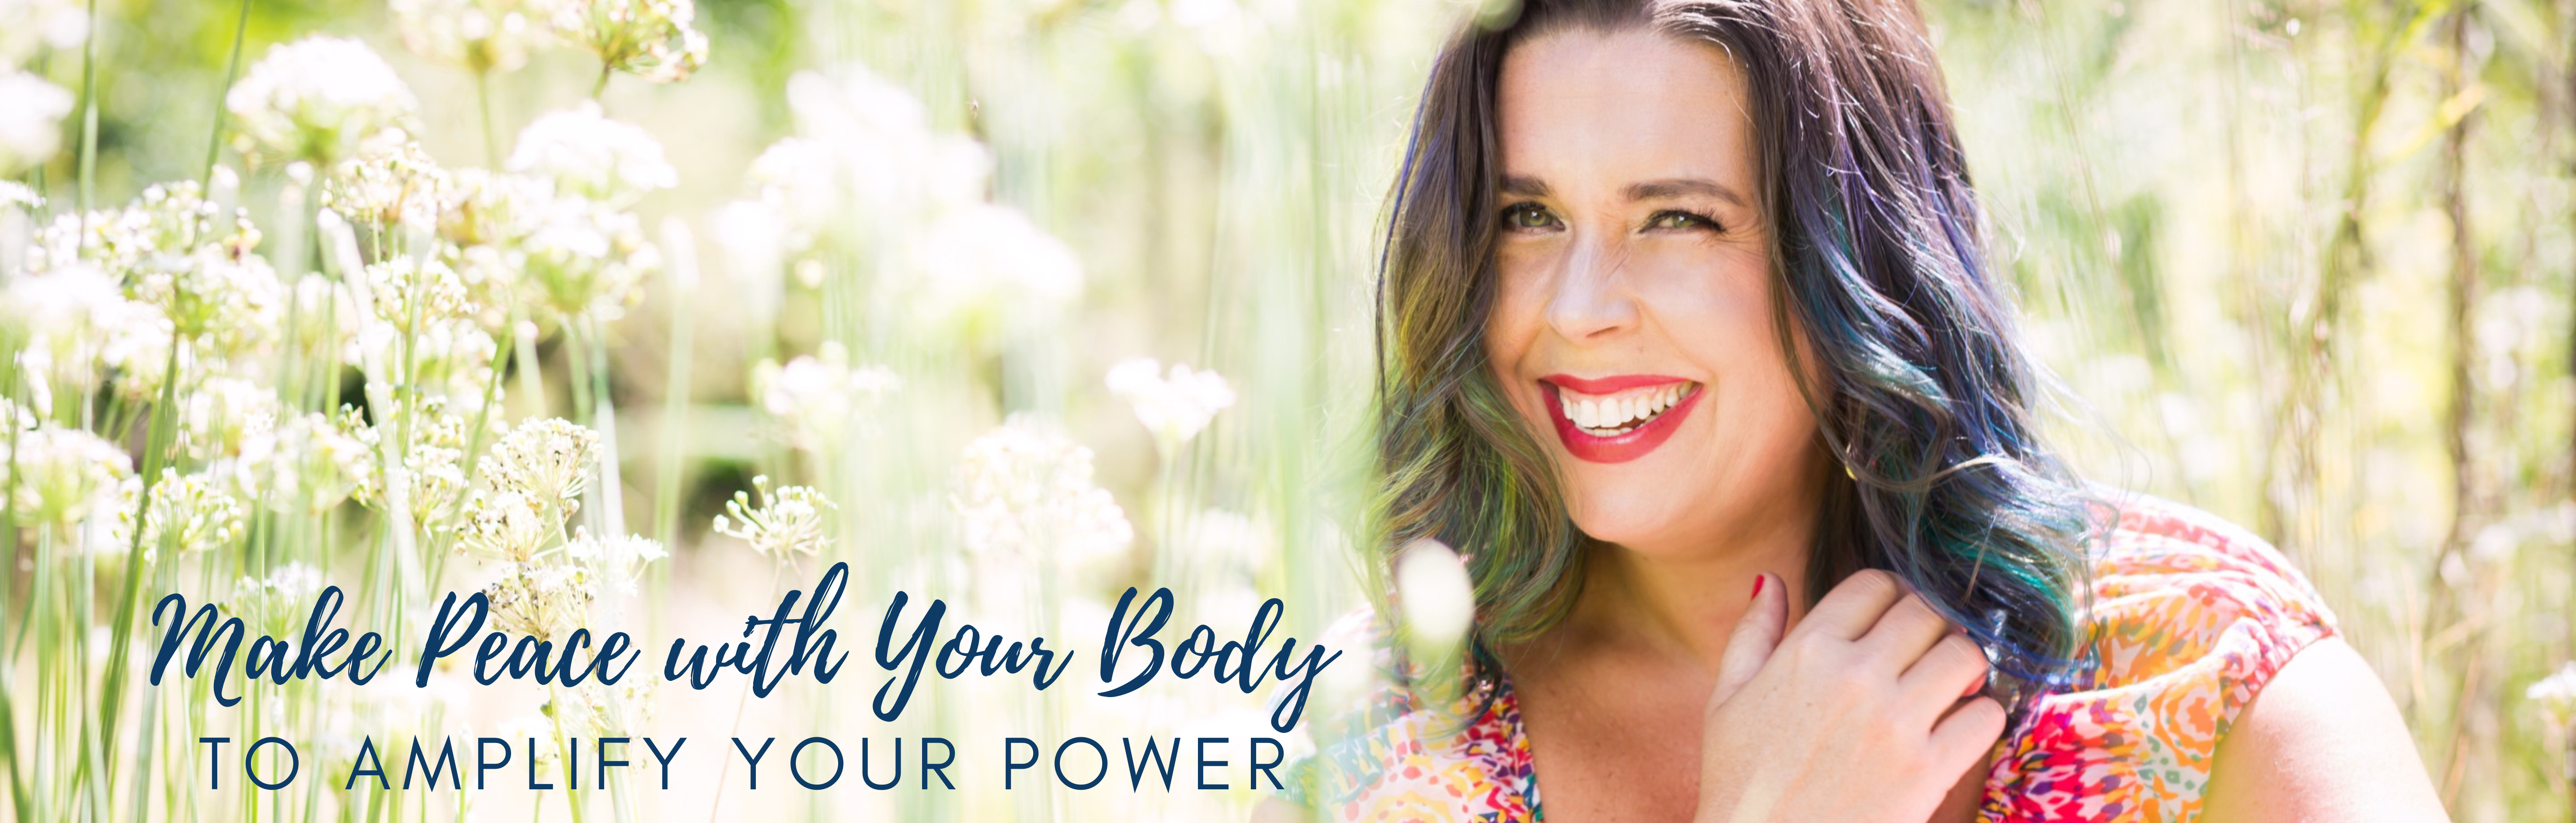 Make peace with your body to amplify your power